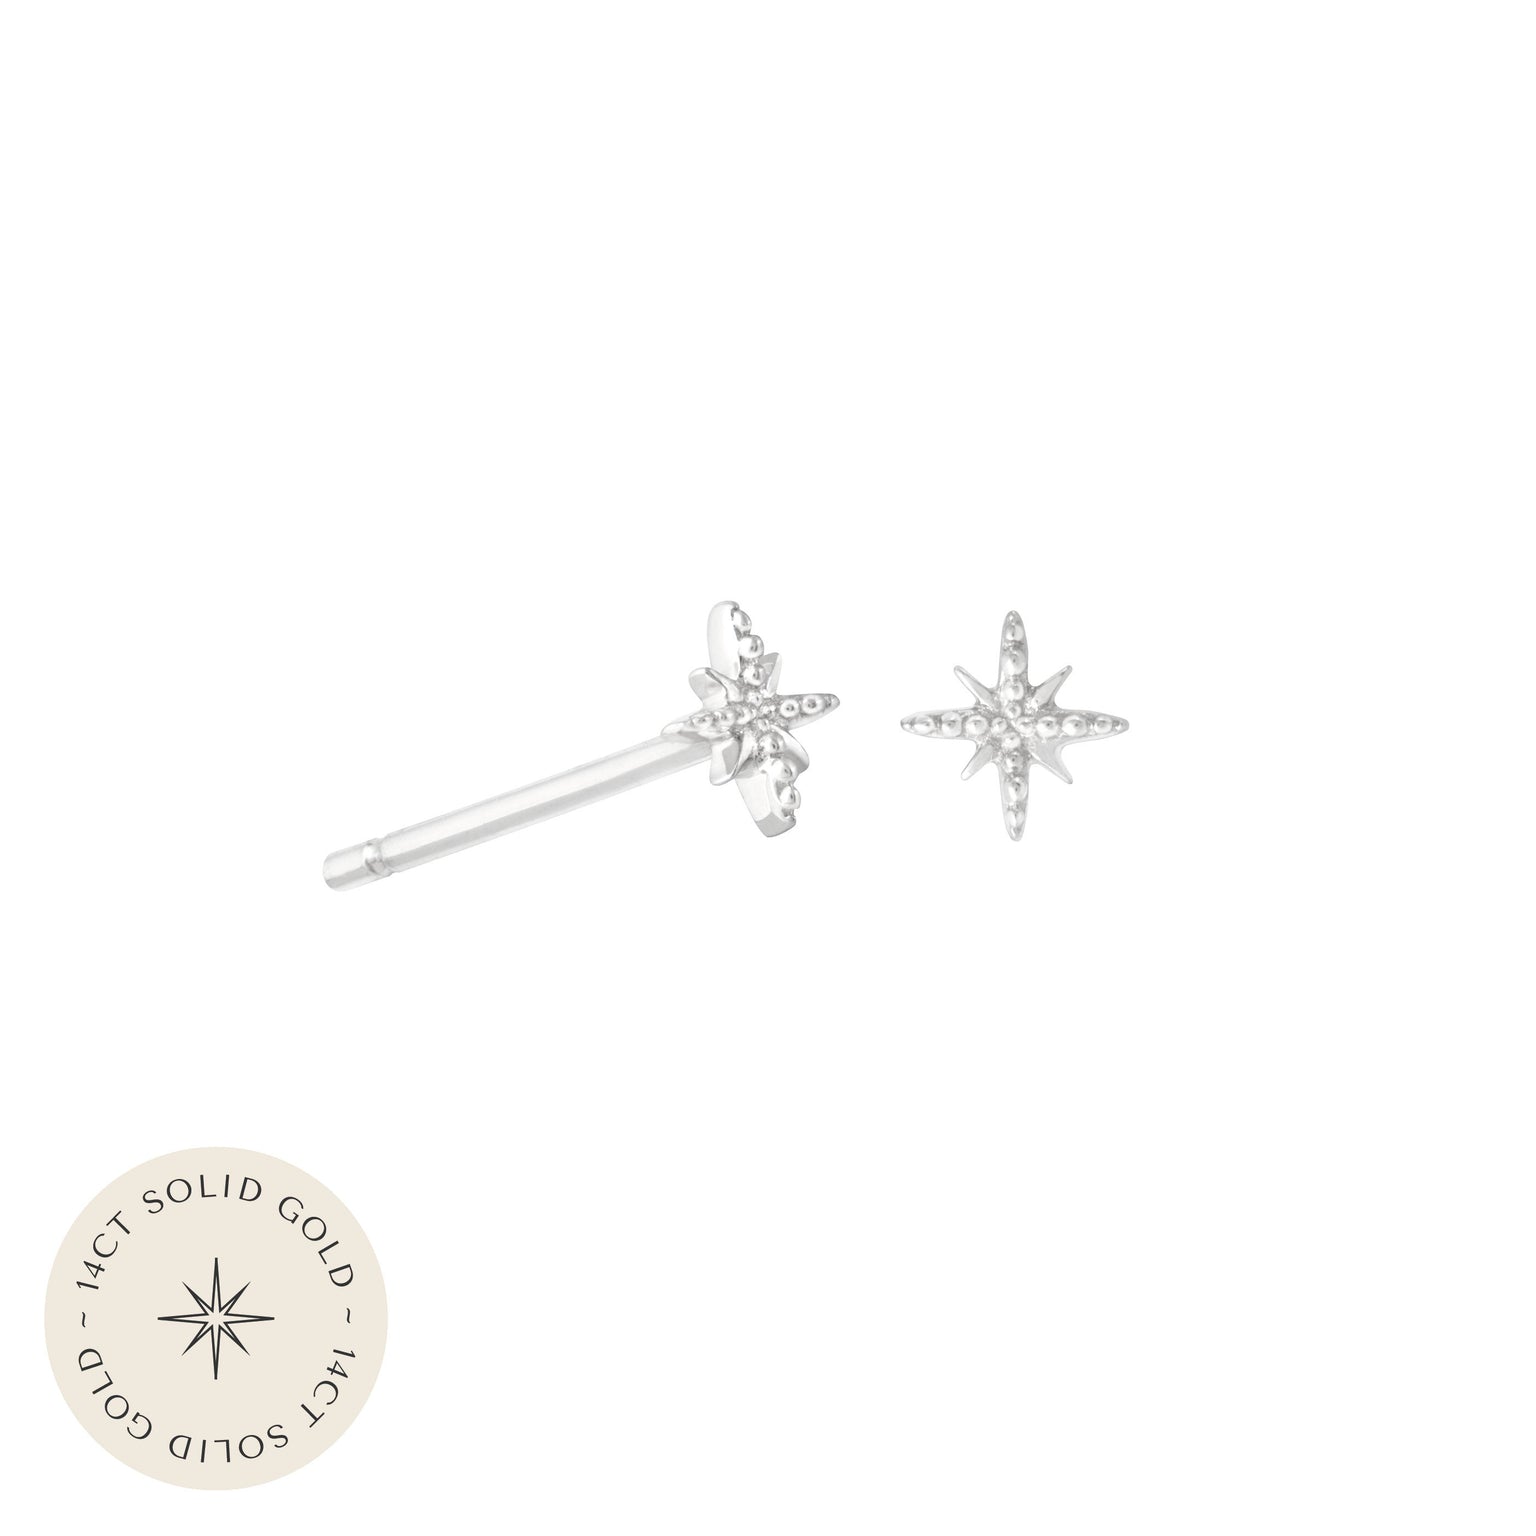 Twilight Stud Earrings in Solid White Gold with 14ct solid gold label